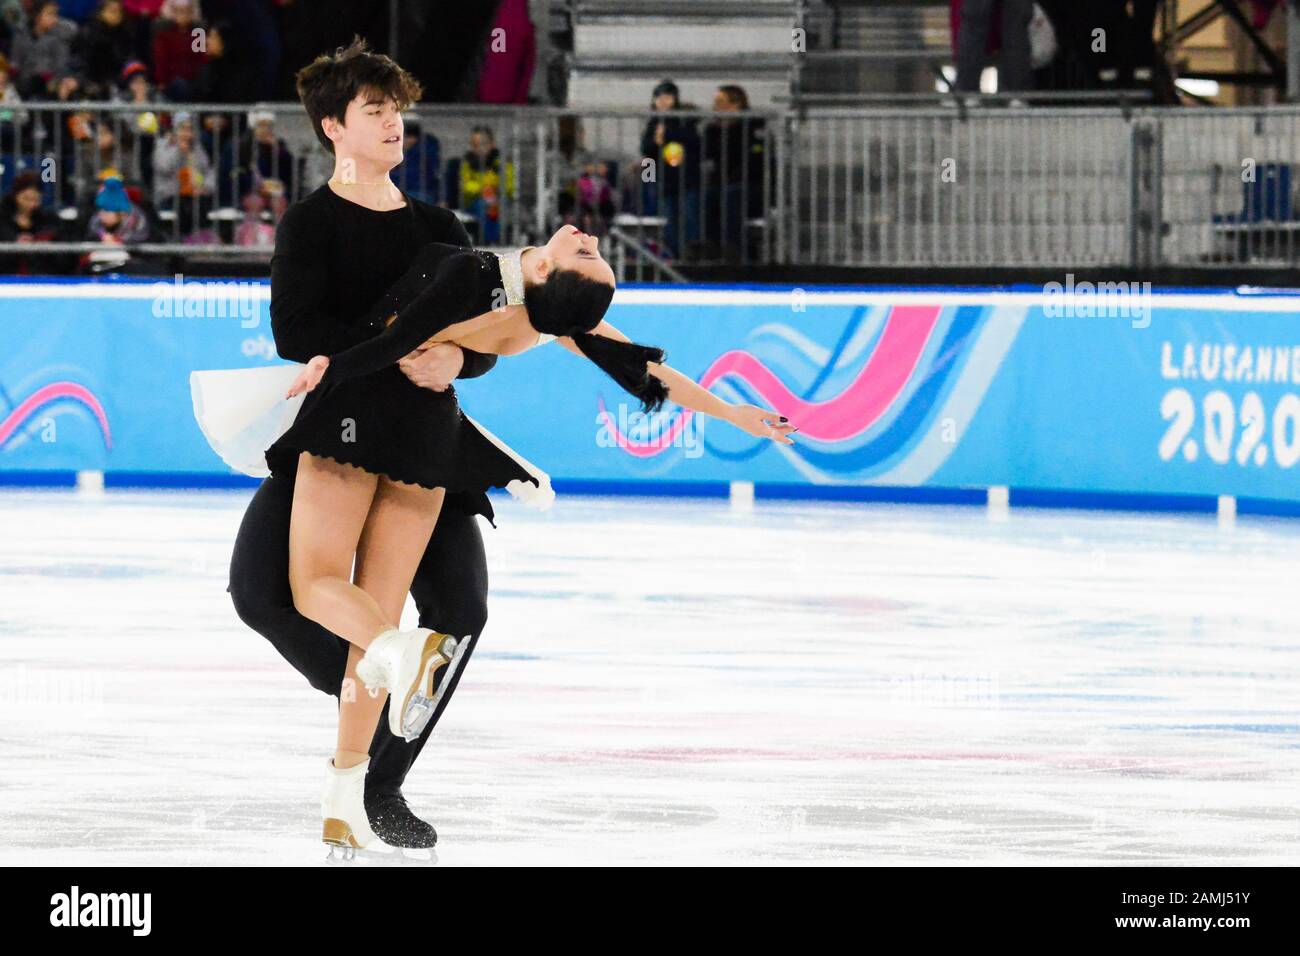 Lausanne, Switzerland. 13th Jan, 2020. Andrea Tuba and Giulia Tuba of Italy  compete in the Ice Dance Free Dance event in the 2020 Winter Youth Olympic  Games in Lausanne Switzerland. Credit: Christopher